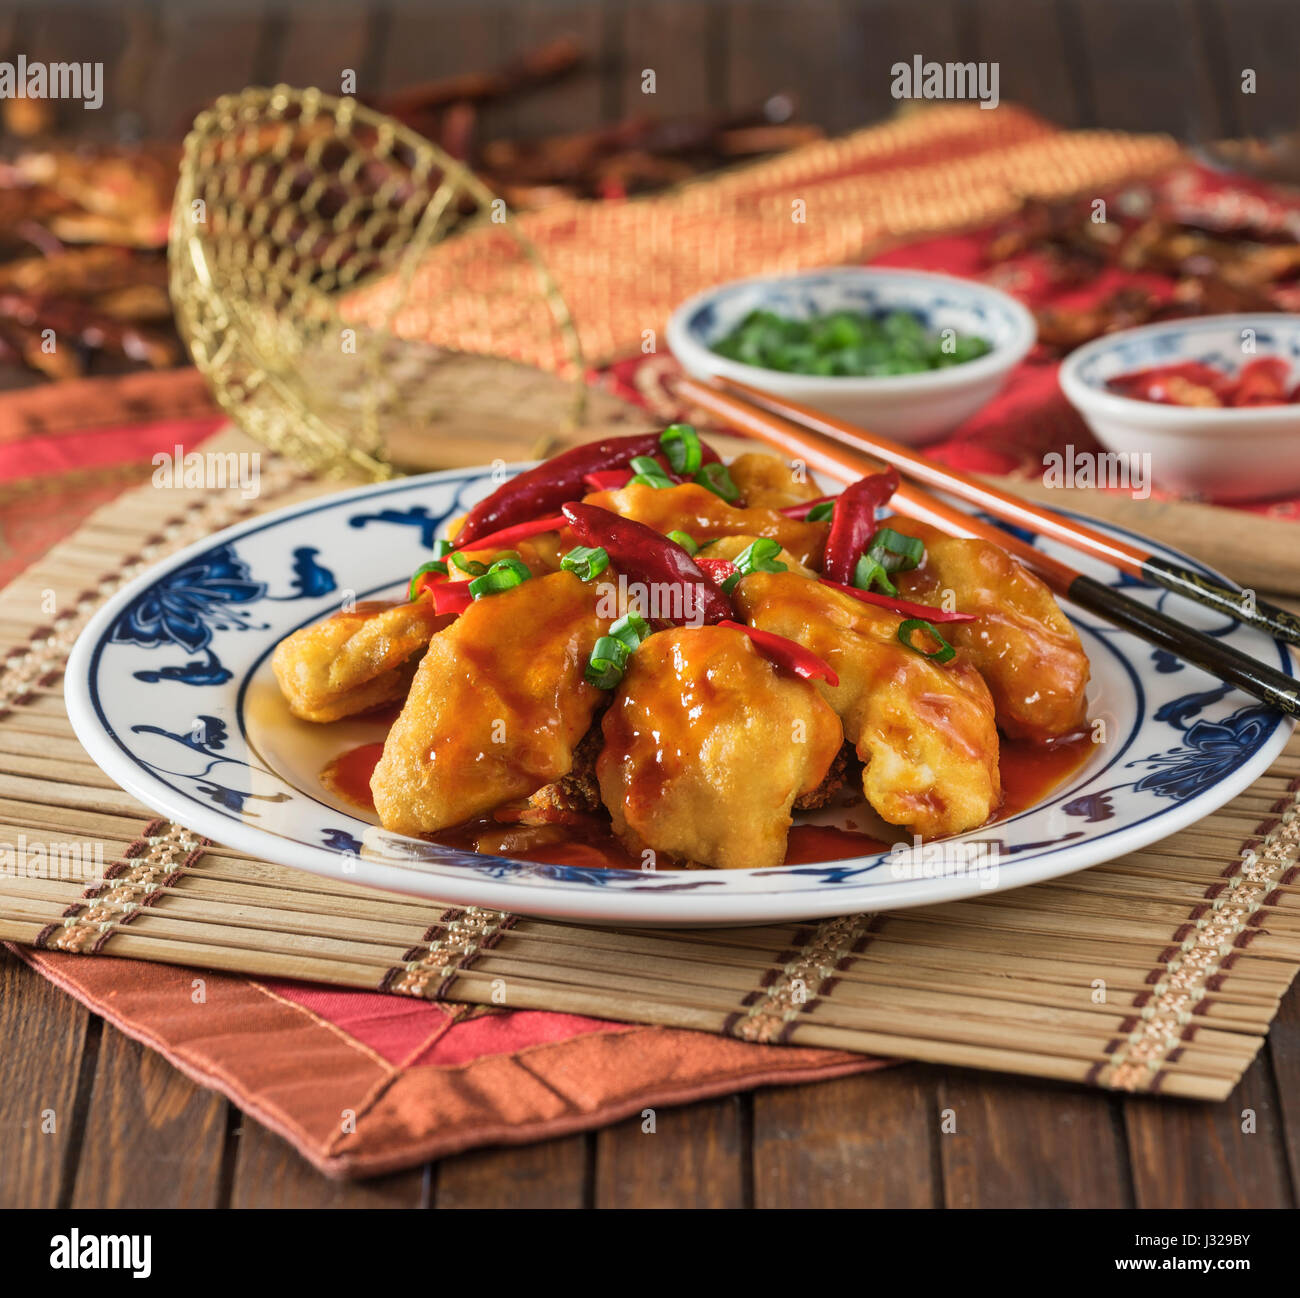 Firecracker chicken. Spicy fried chicken in a hot chilli sauce. Chinese food. Stock Photo